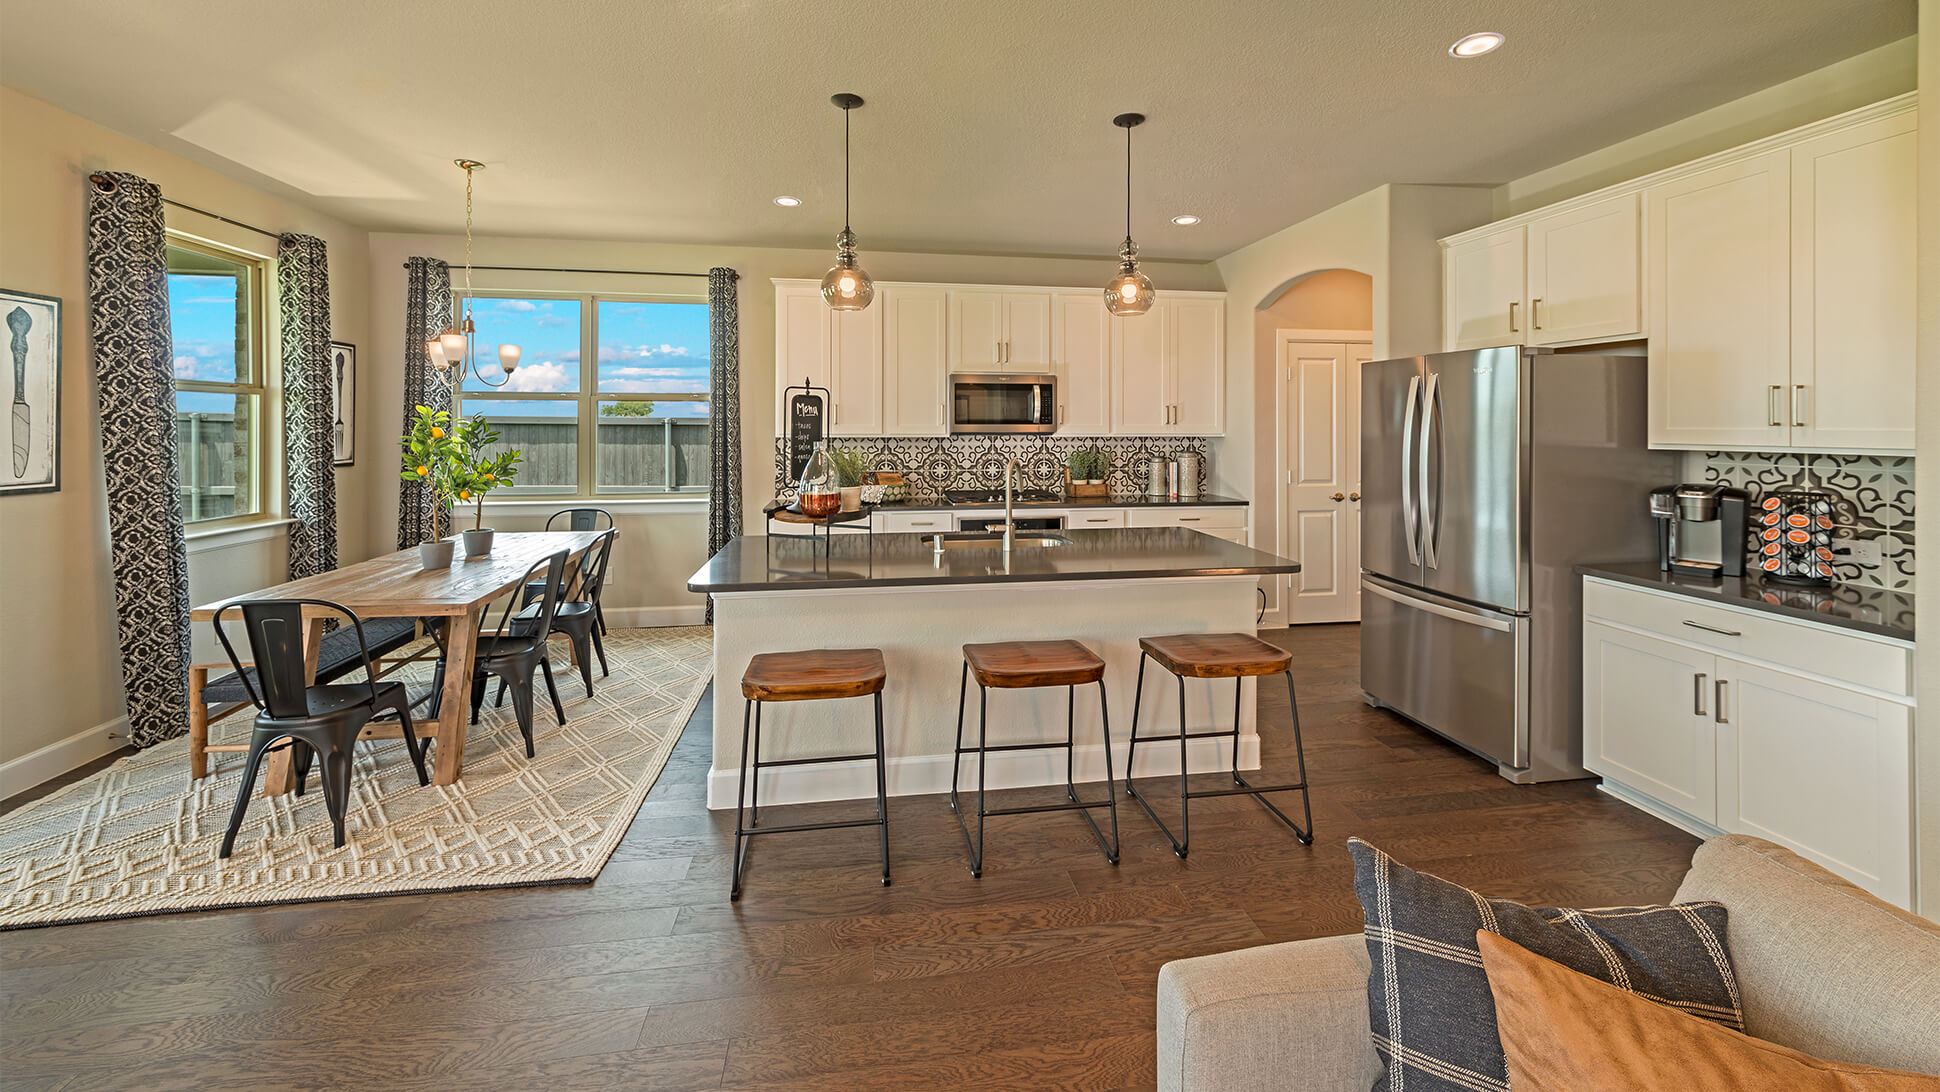 Modern kitchen and dining area in new home communities in Mansfield TX with stainless steel appliances, an island with bar stools, and a wooden dining table.